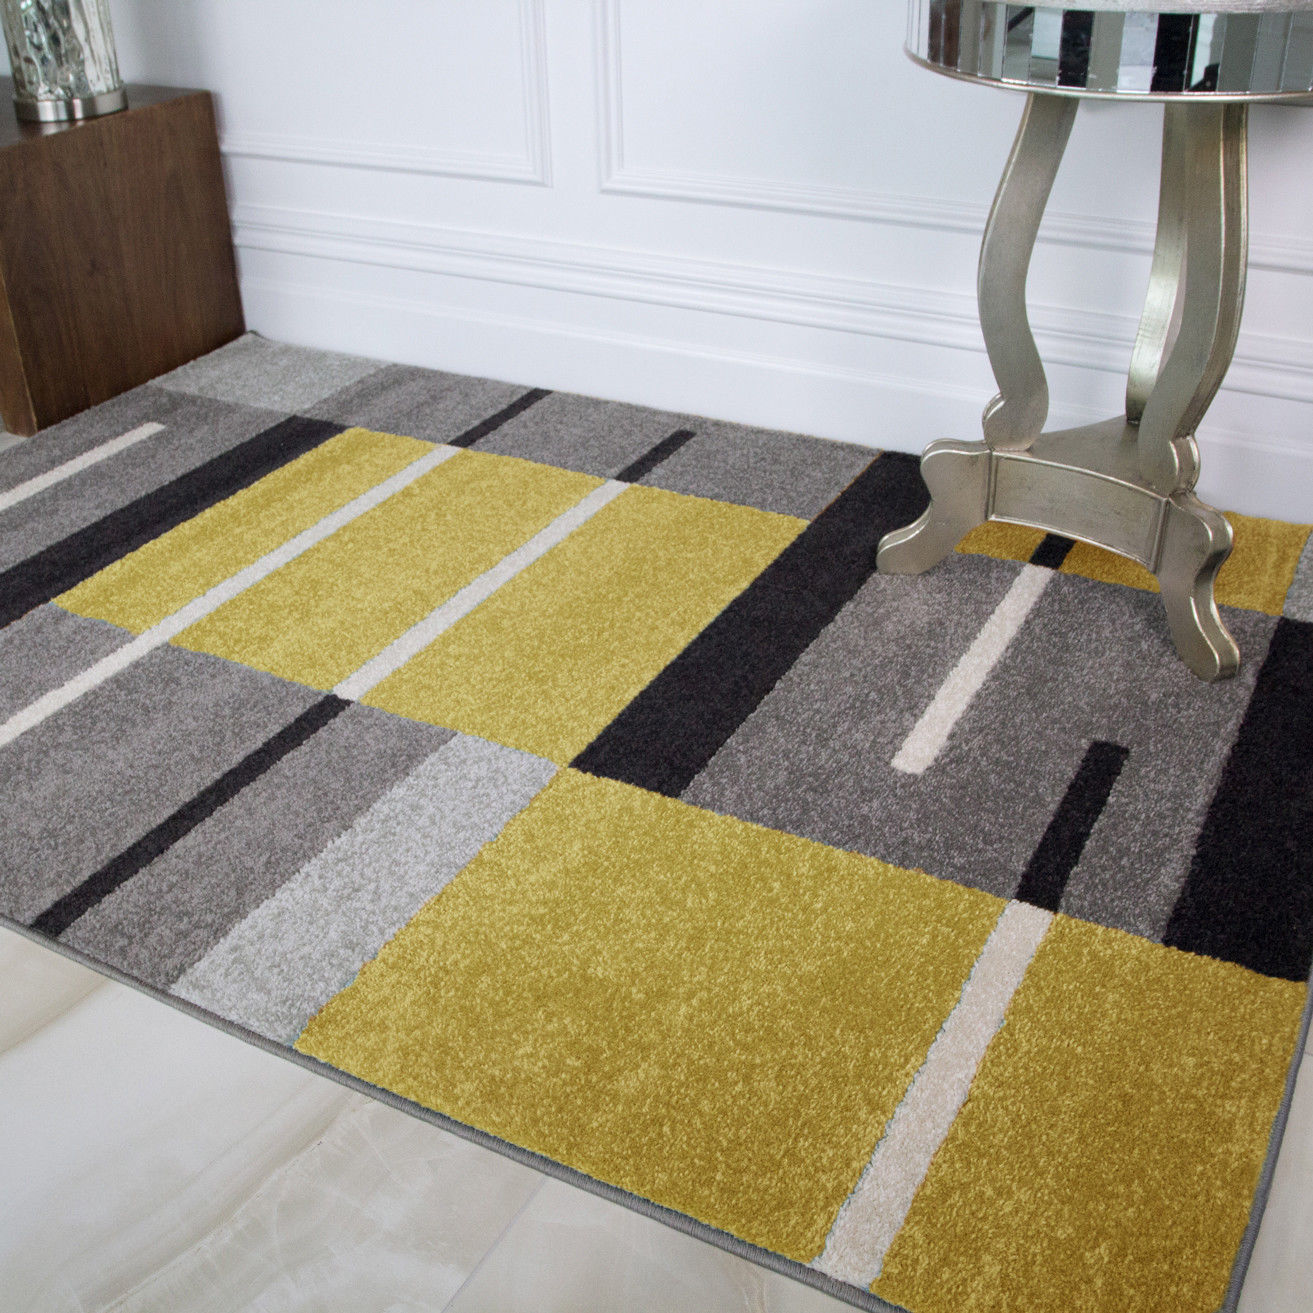 Ochre Mustard Yellow Rugs Living Room Small Large Geometric Rugs Affordable Rugs